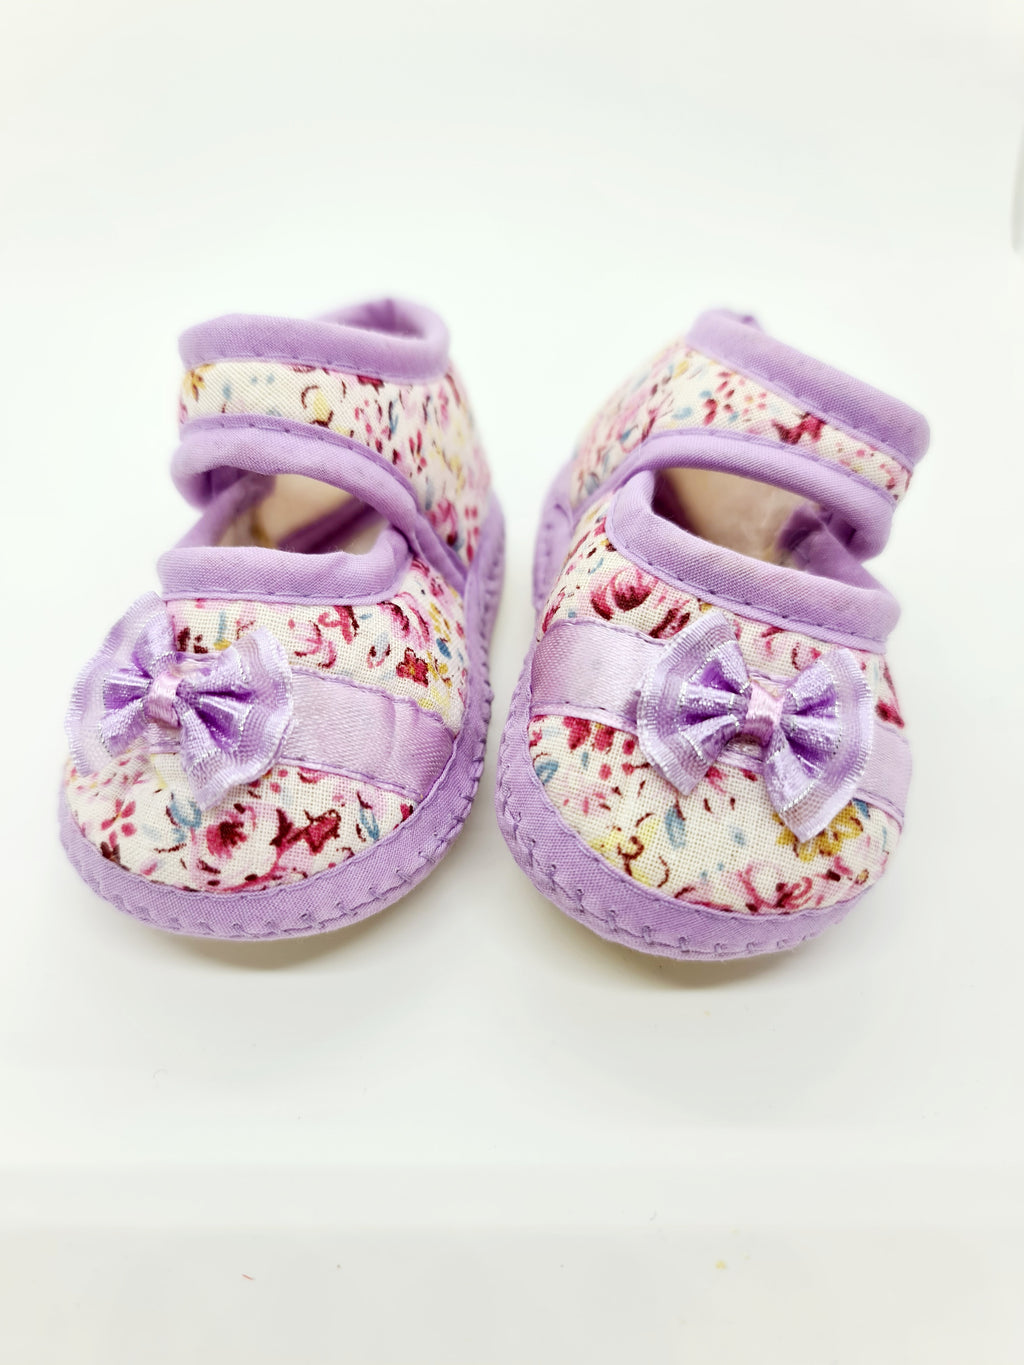 Soft Fabric Baby Shoes- Lilac/Floral